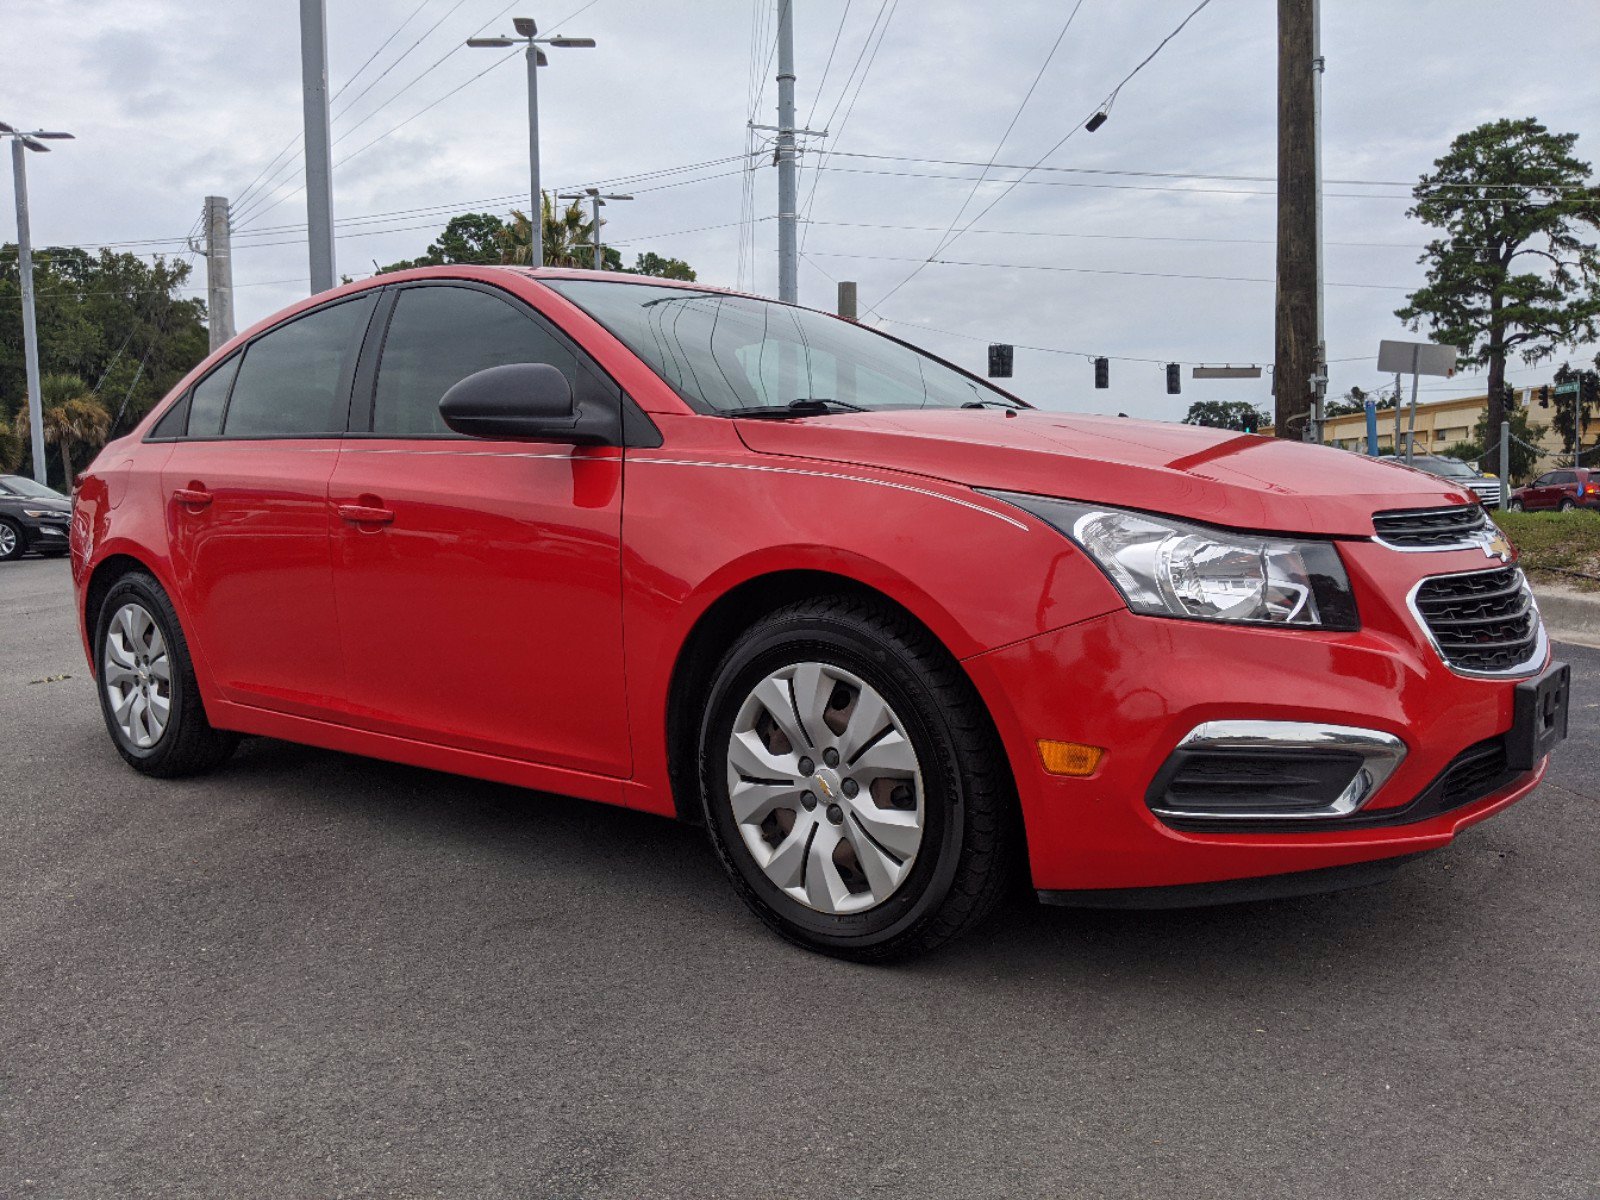 PreOwned 2016 Chevrolet Cruze Limited LS 4dr Car in Fort